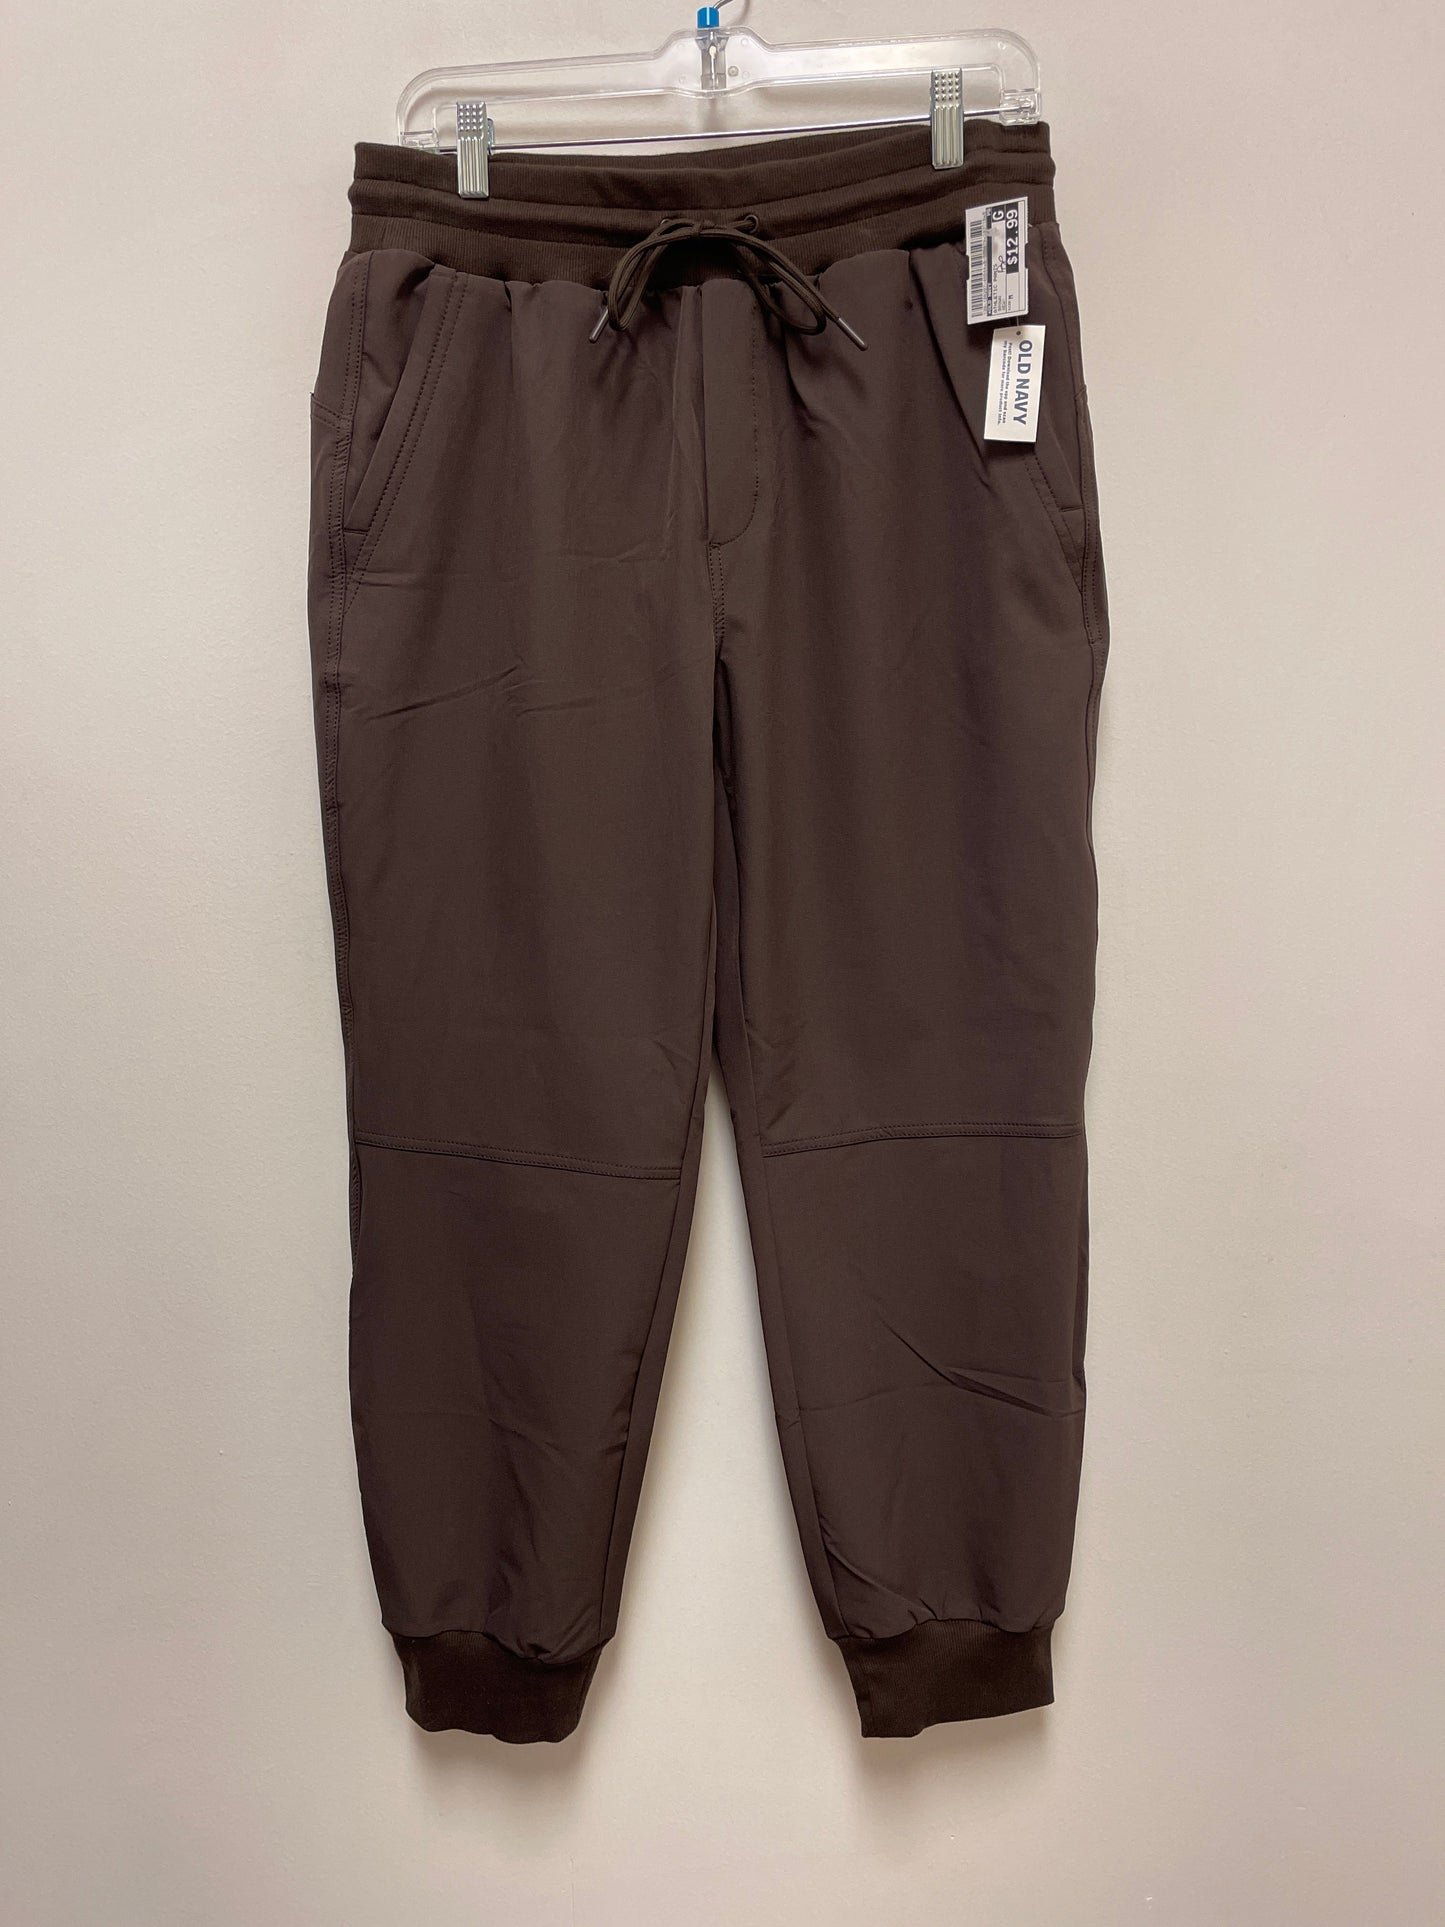 Brown Athletic Pants Old Navy, Size M